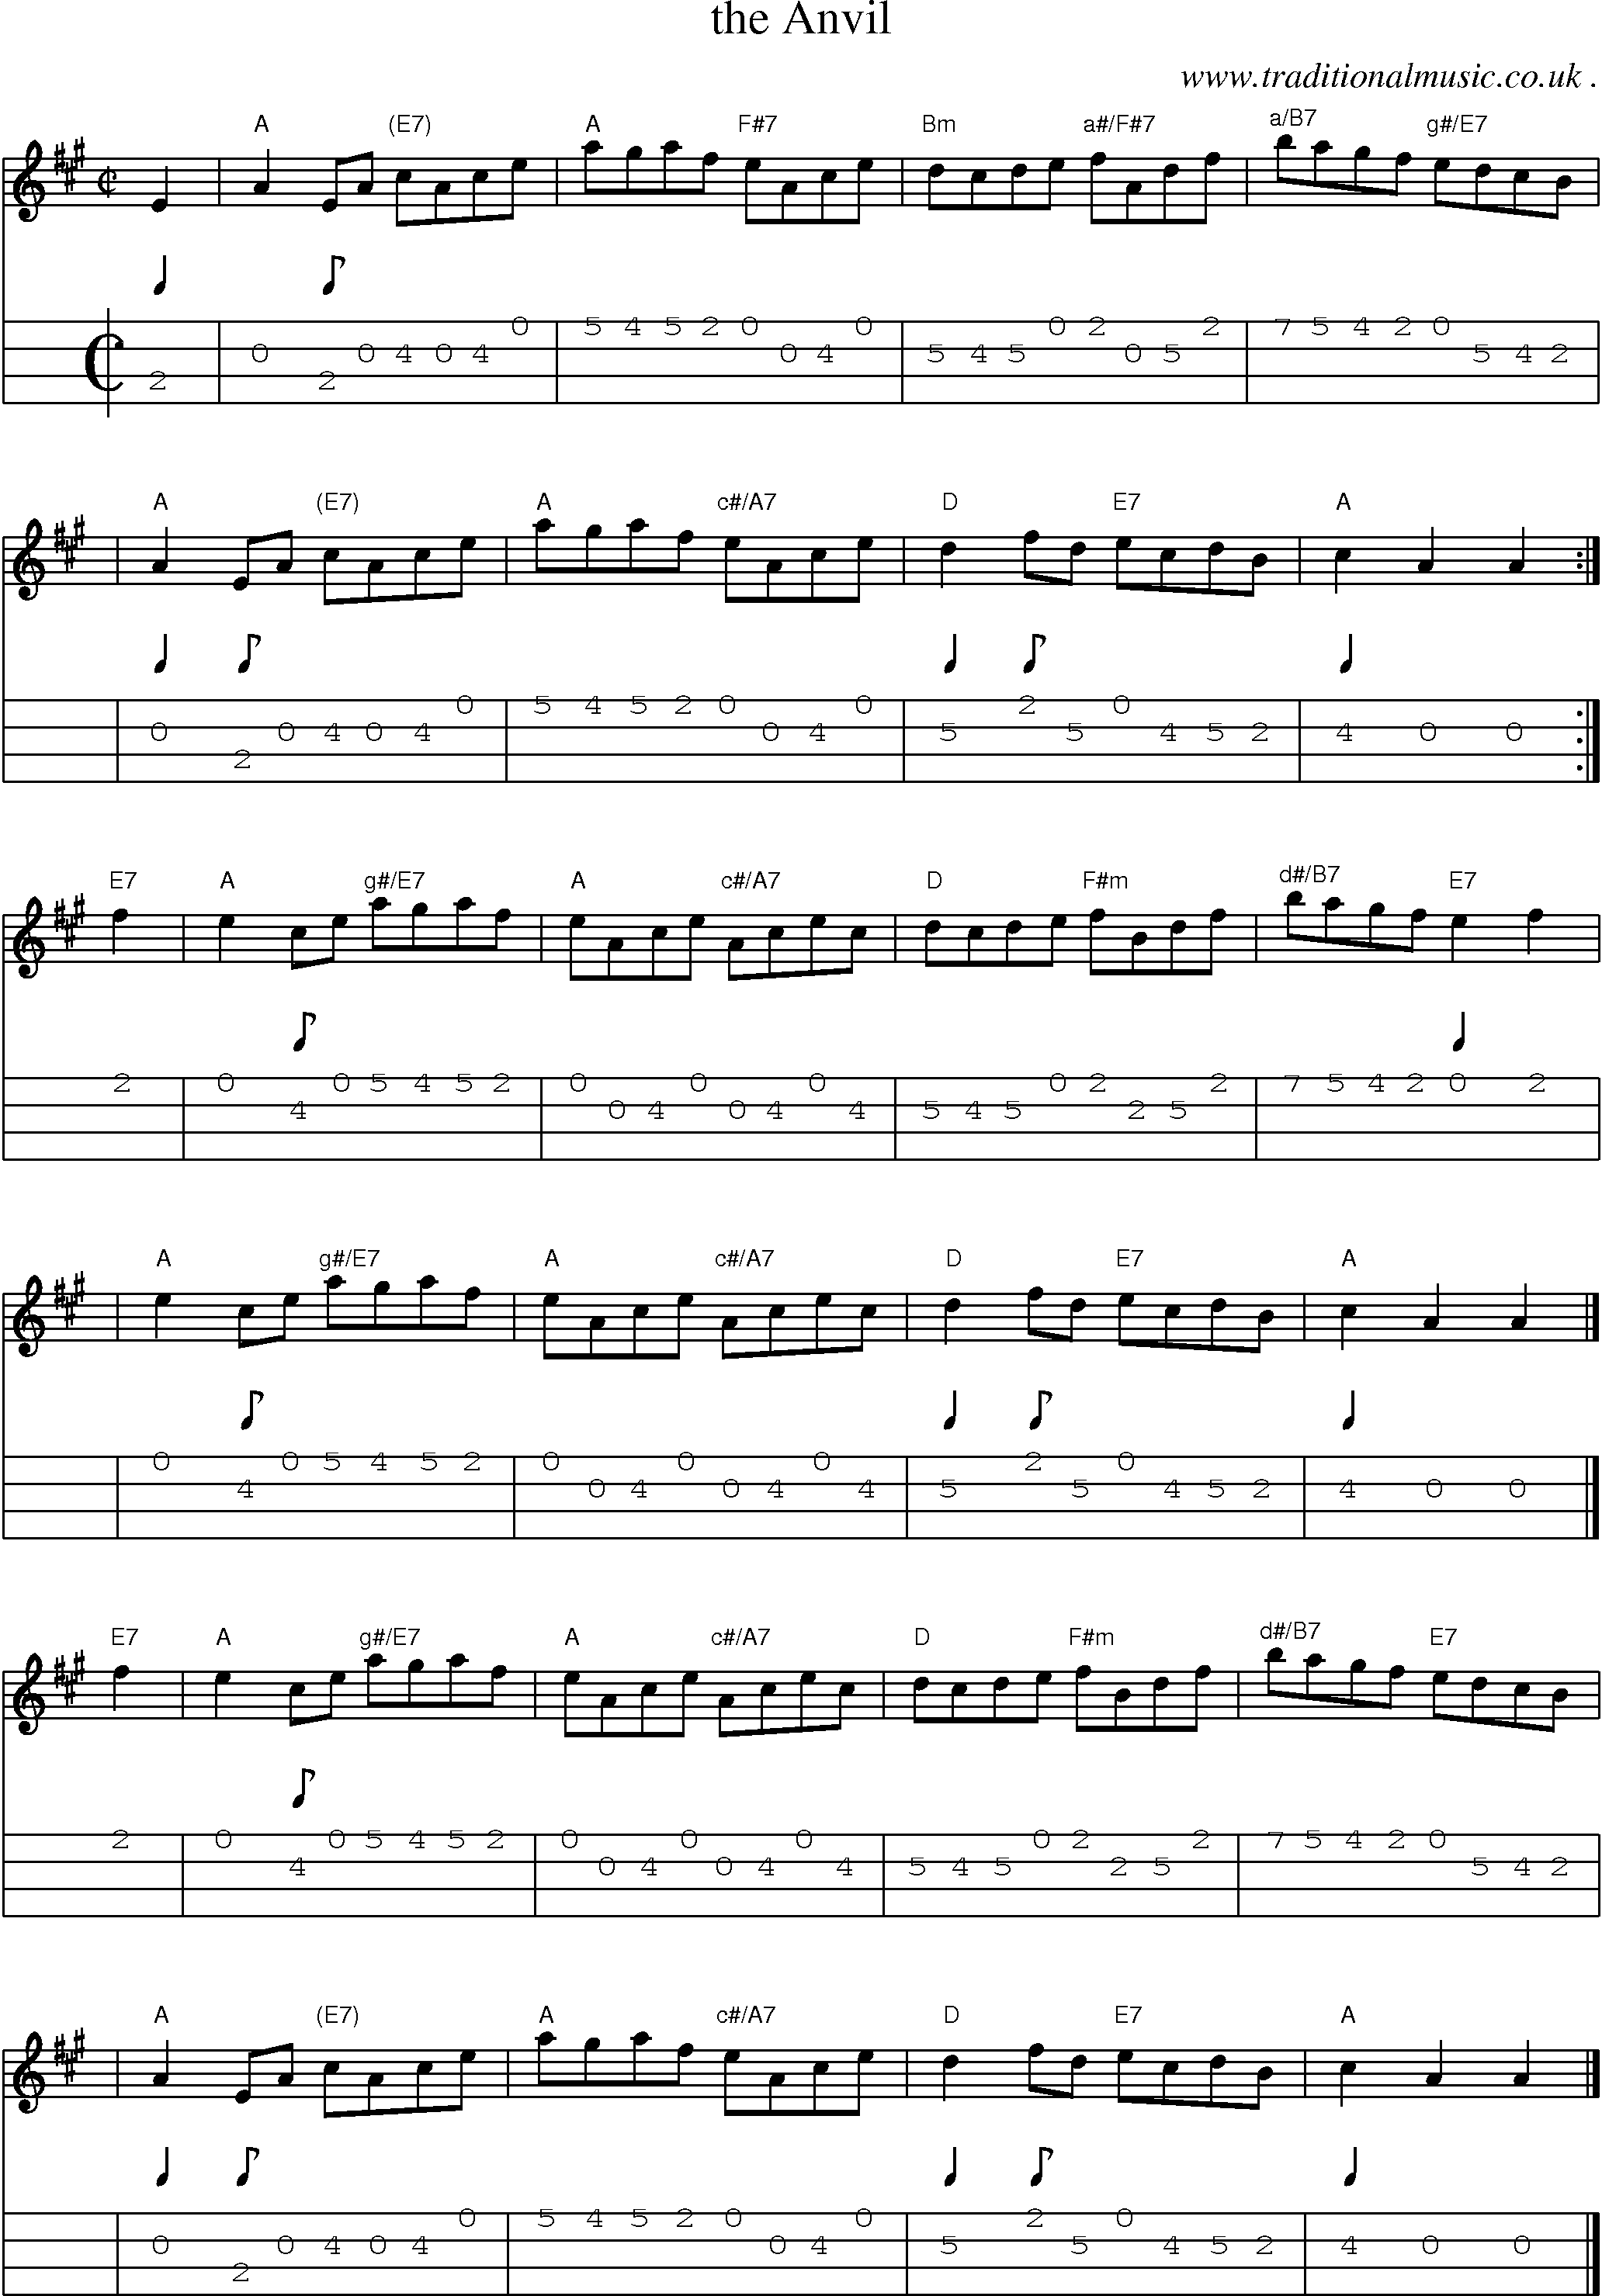 Sheet-music  score, Chords and Mandolin Tabs for The Anvil